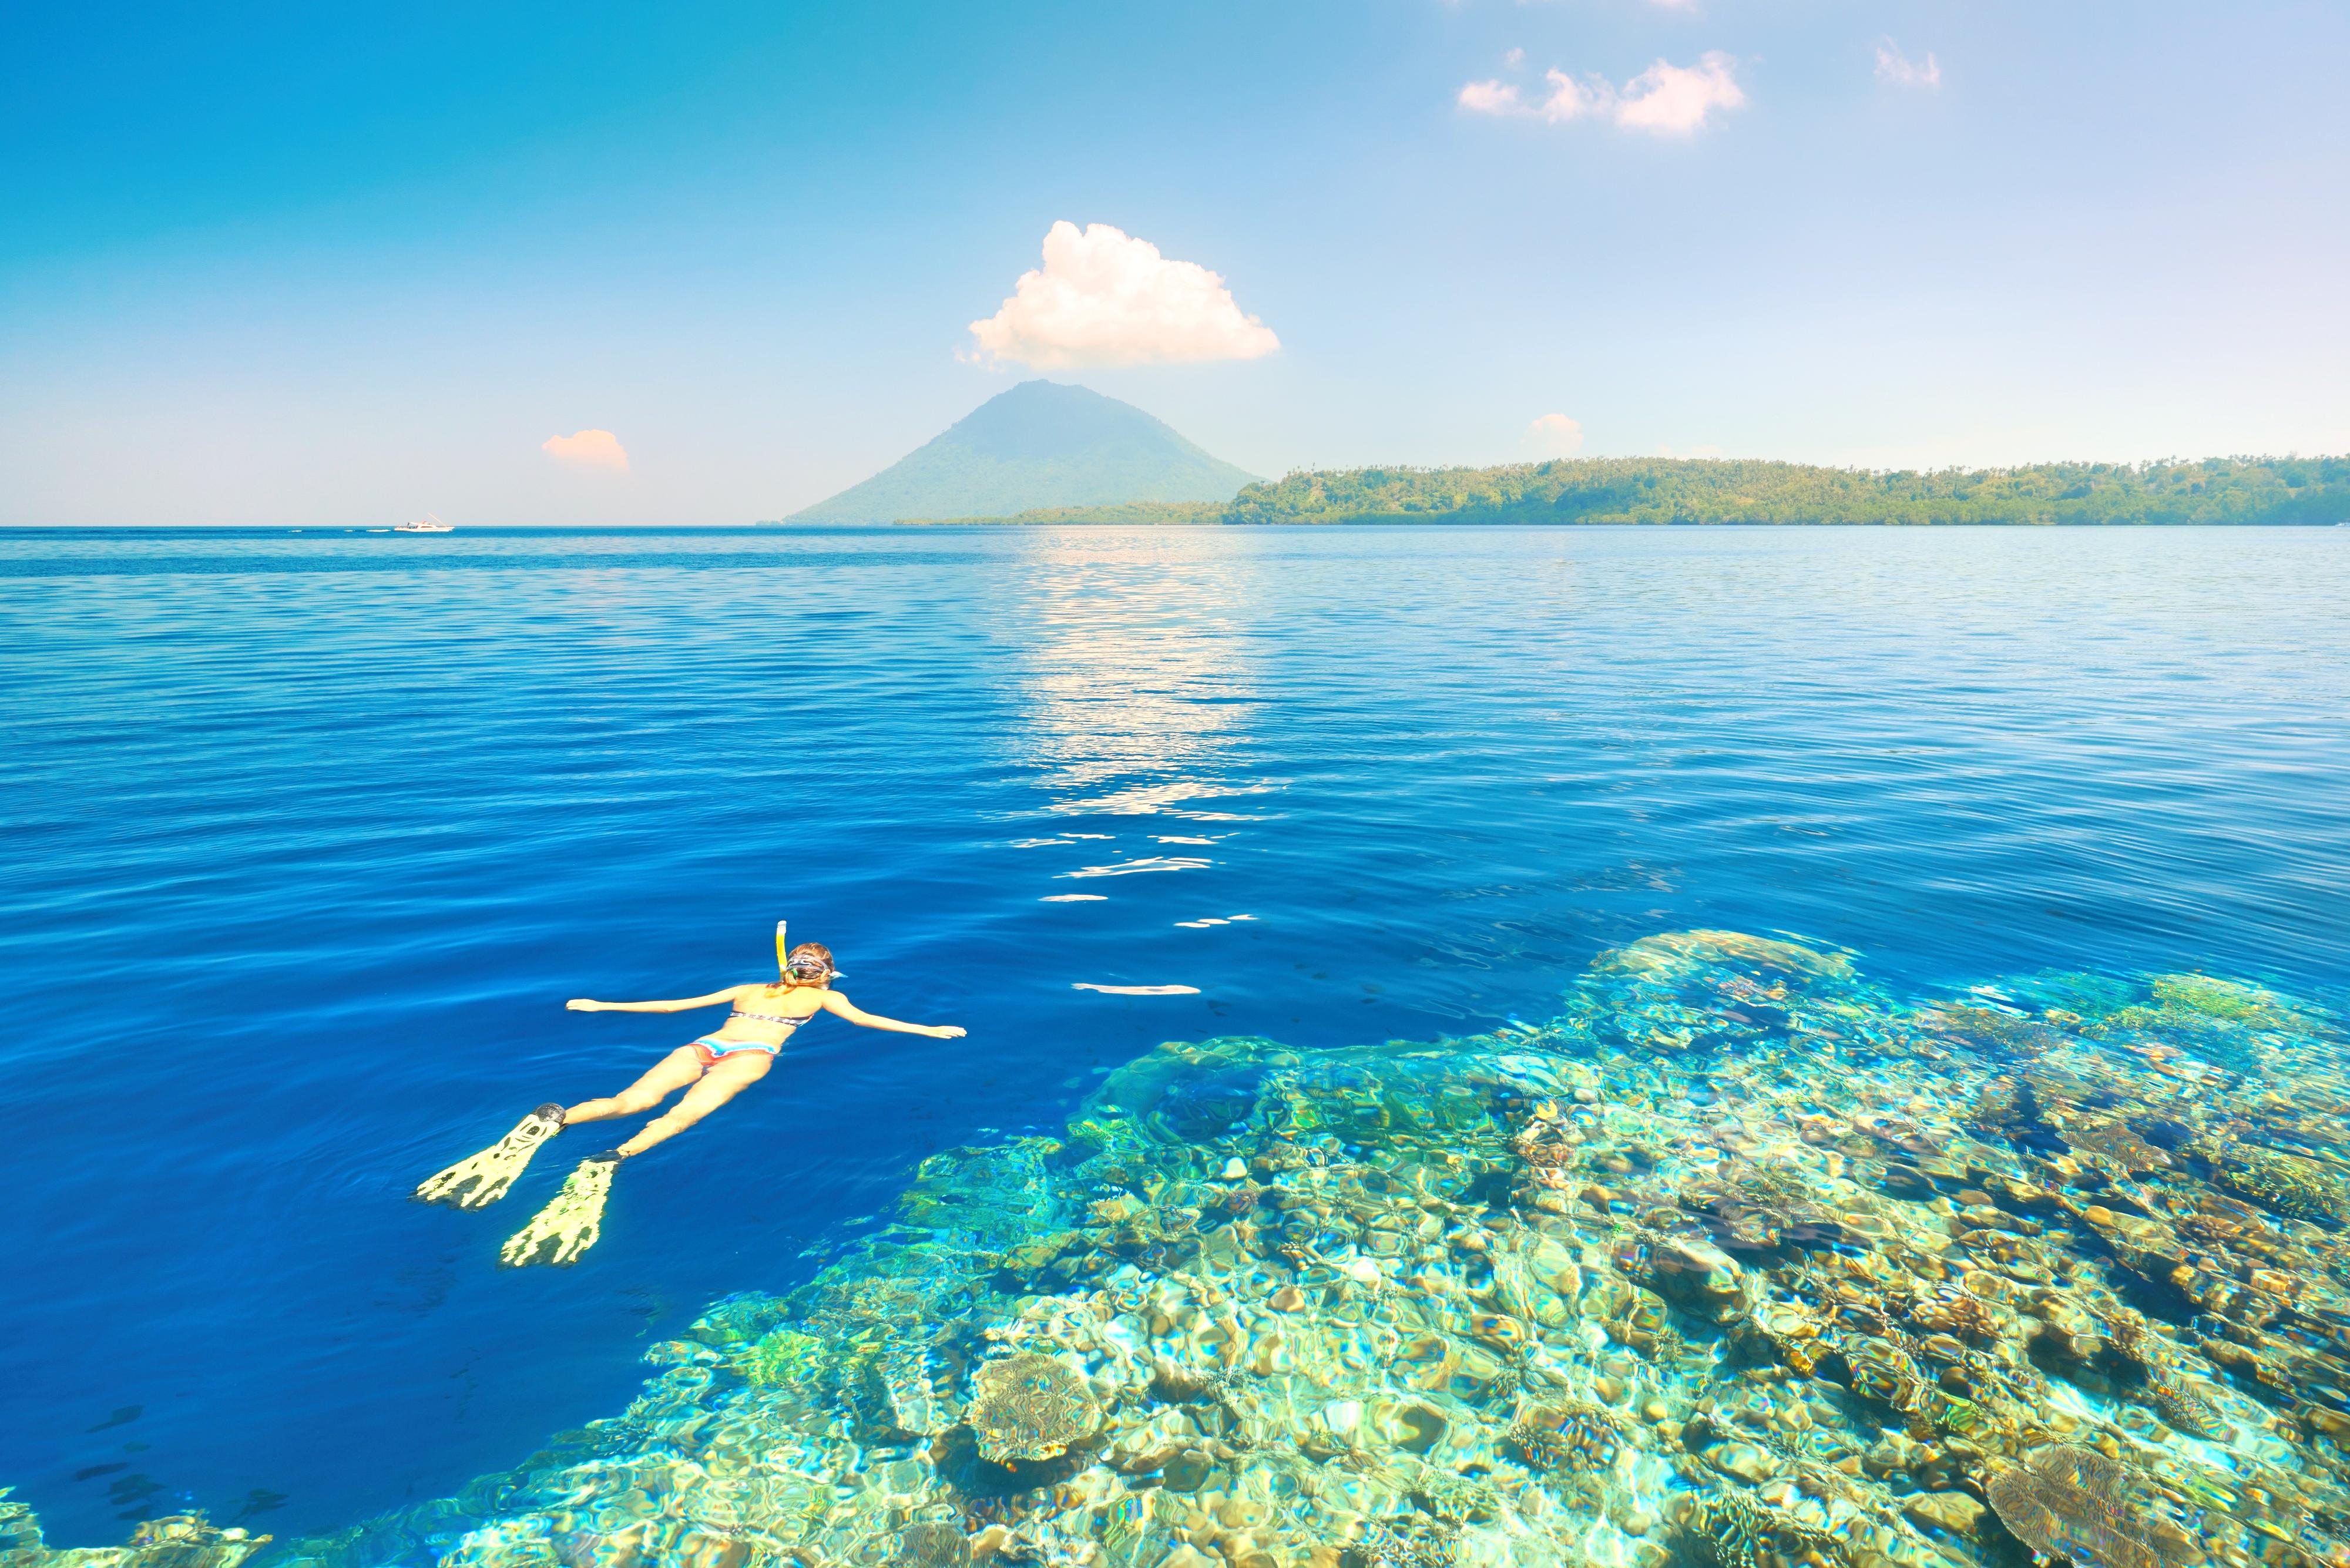 Manado The 6 Most Fun Things To Do In Manado Indonesia Trip101 The Marine Biodiversity Is